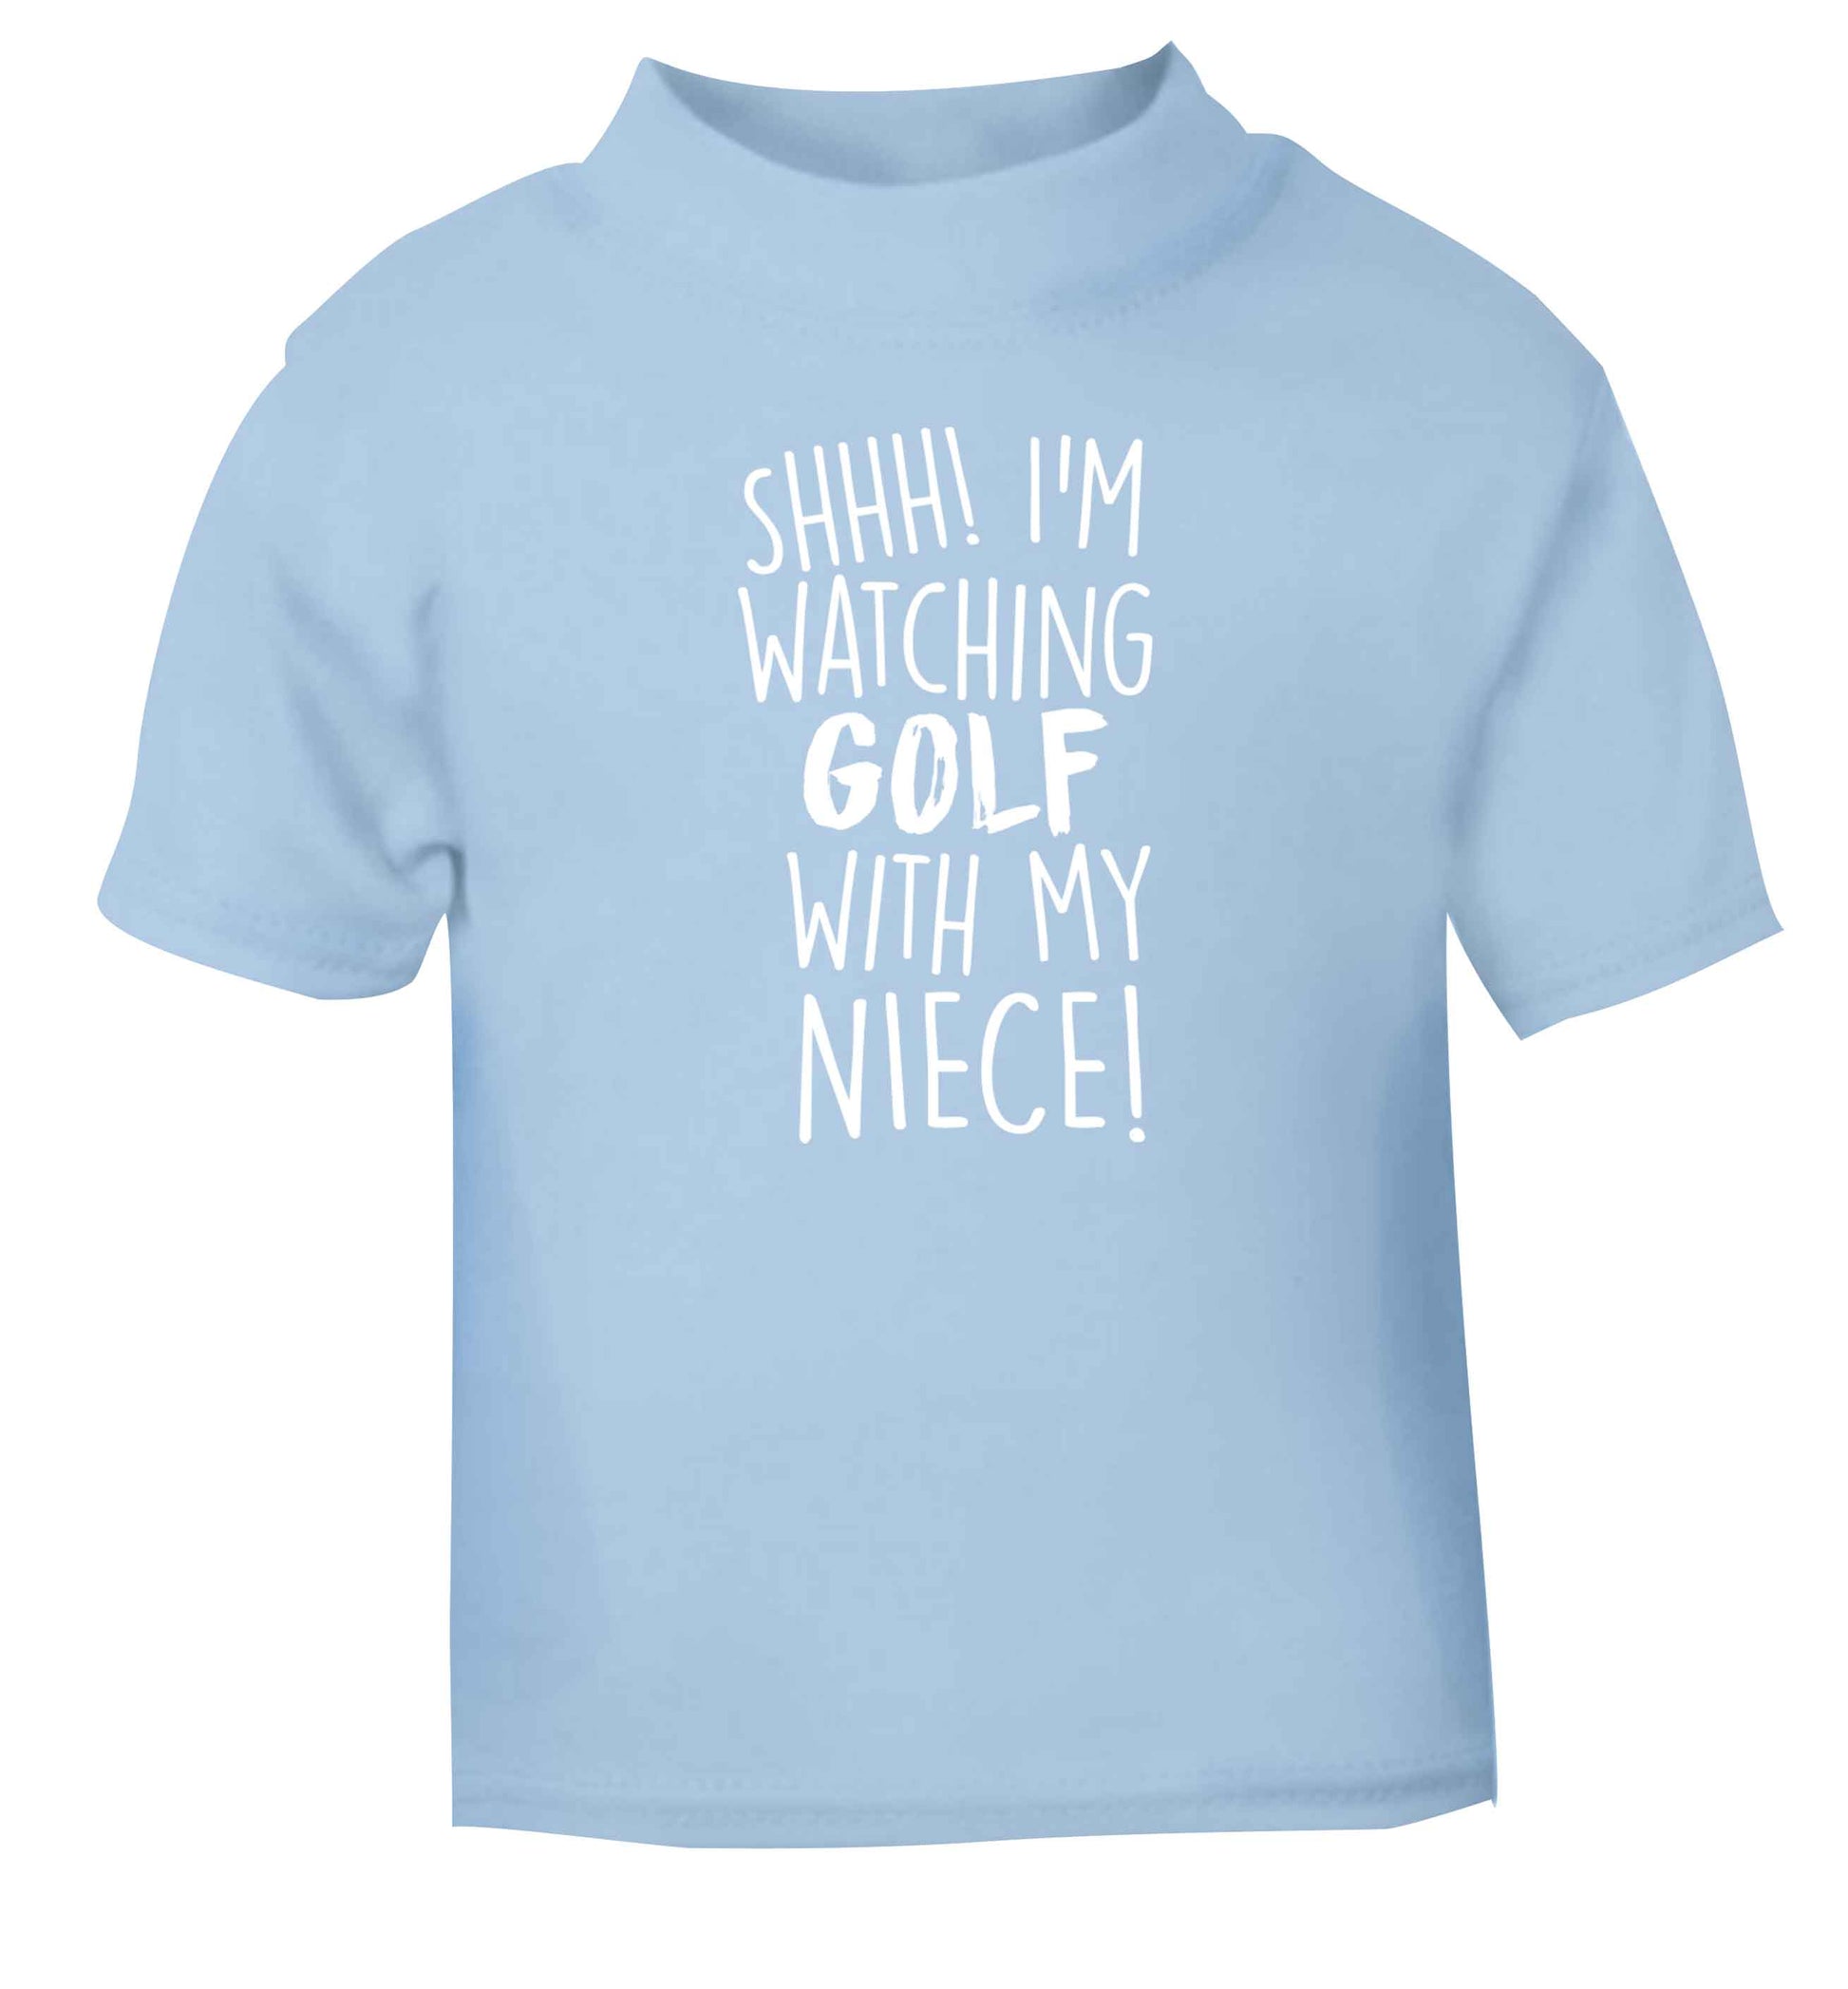 Shh I'm watching golf with my niece light blue Baby Toddler Tshirt 2 Years